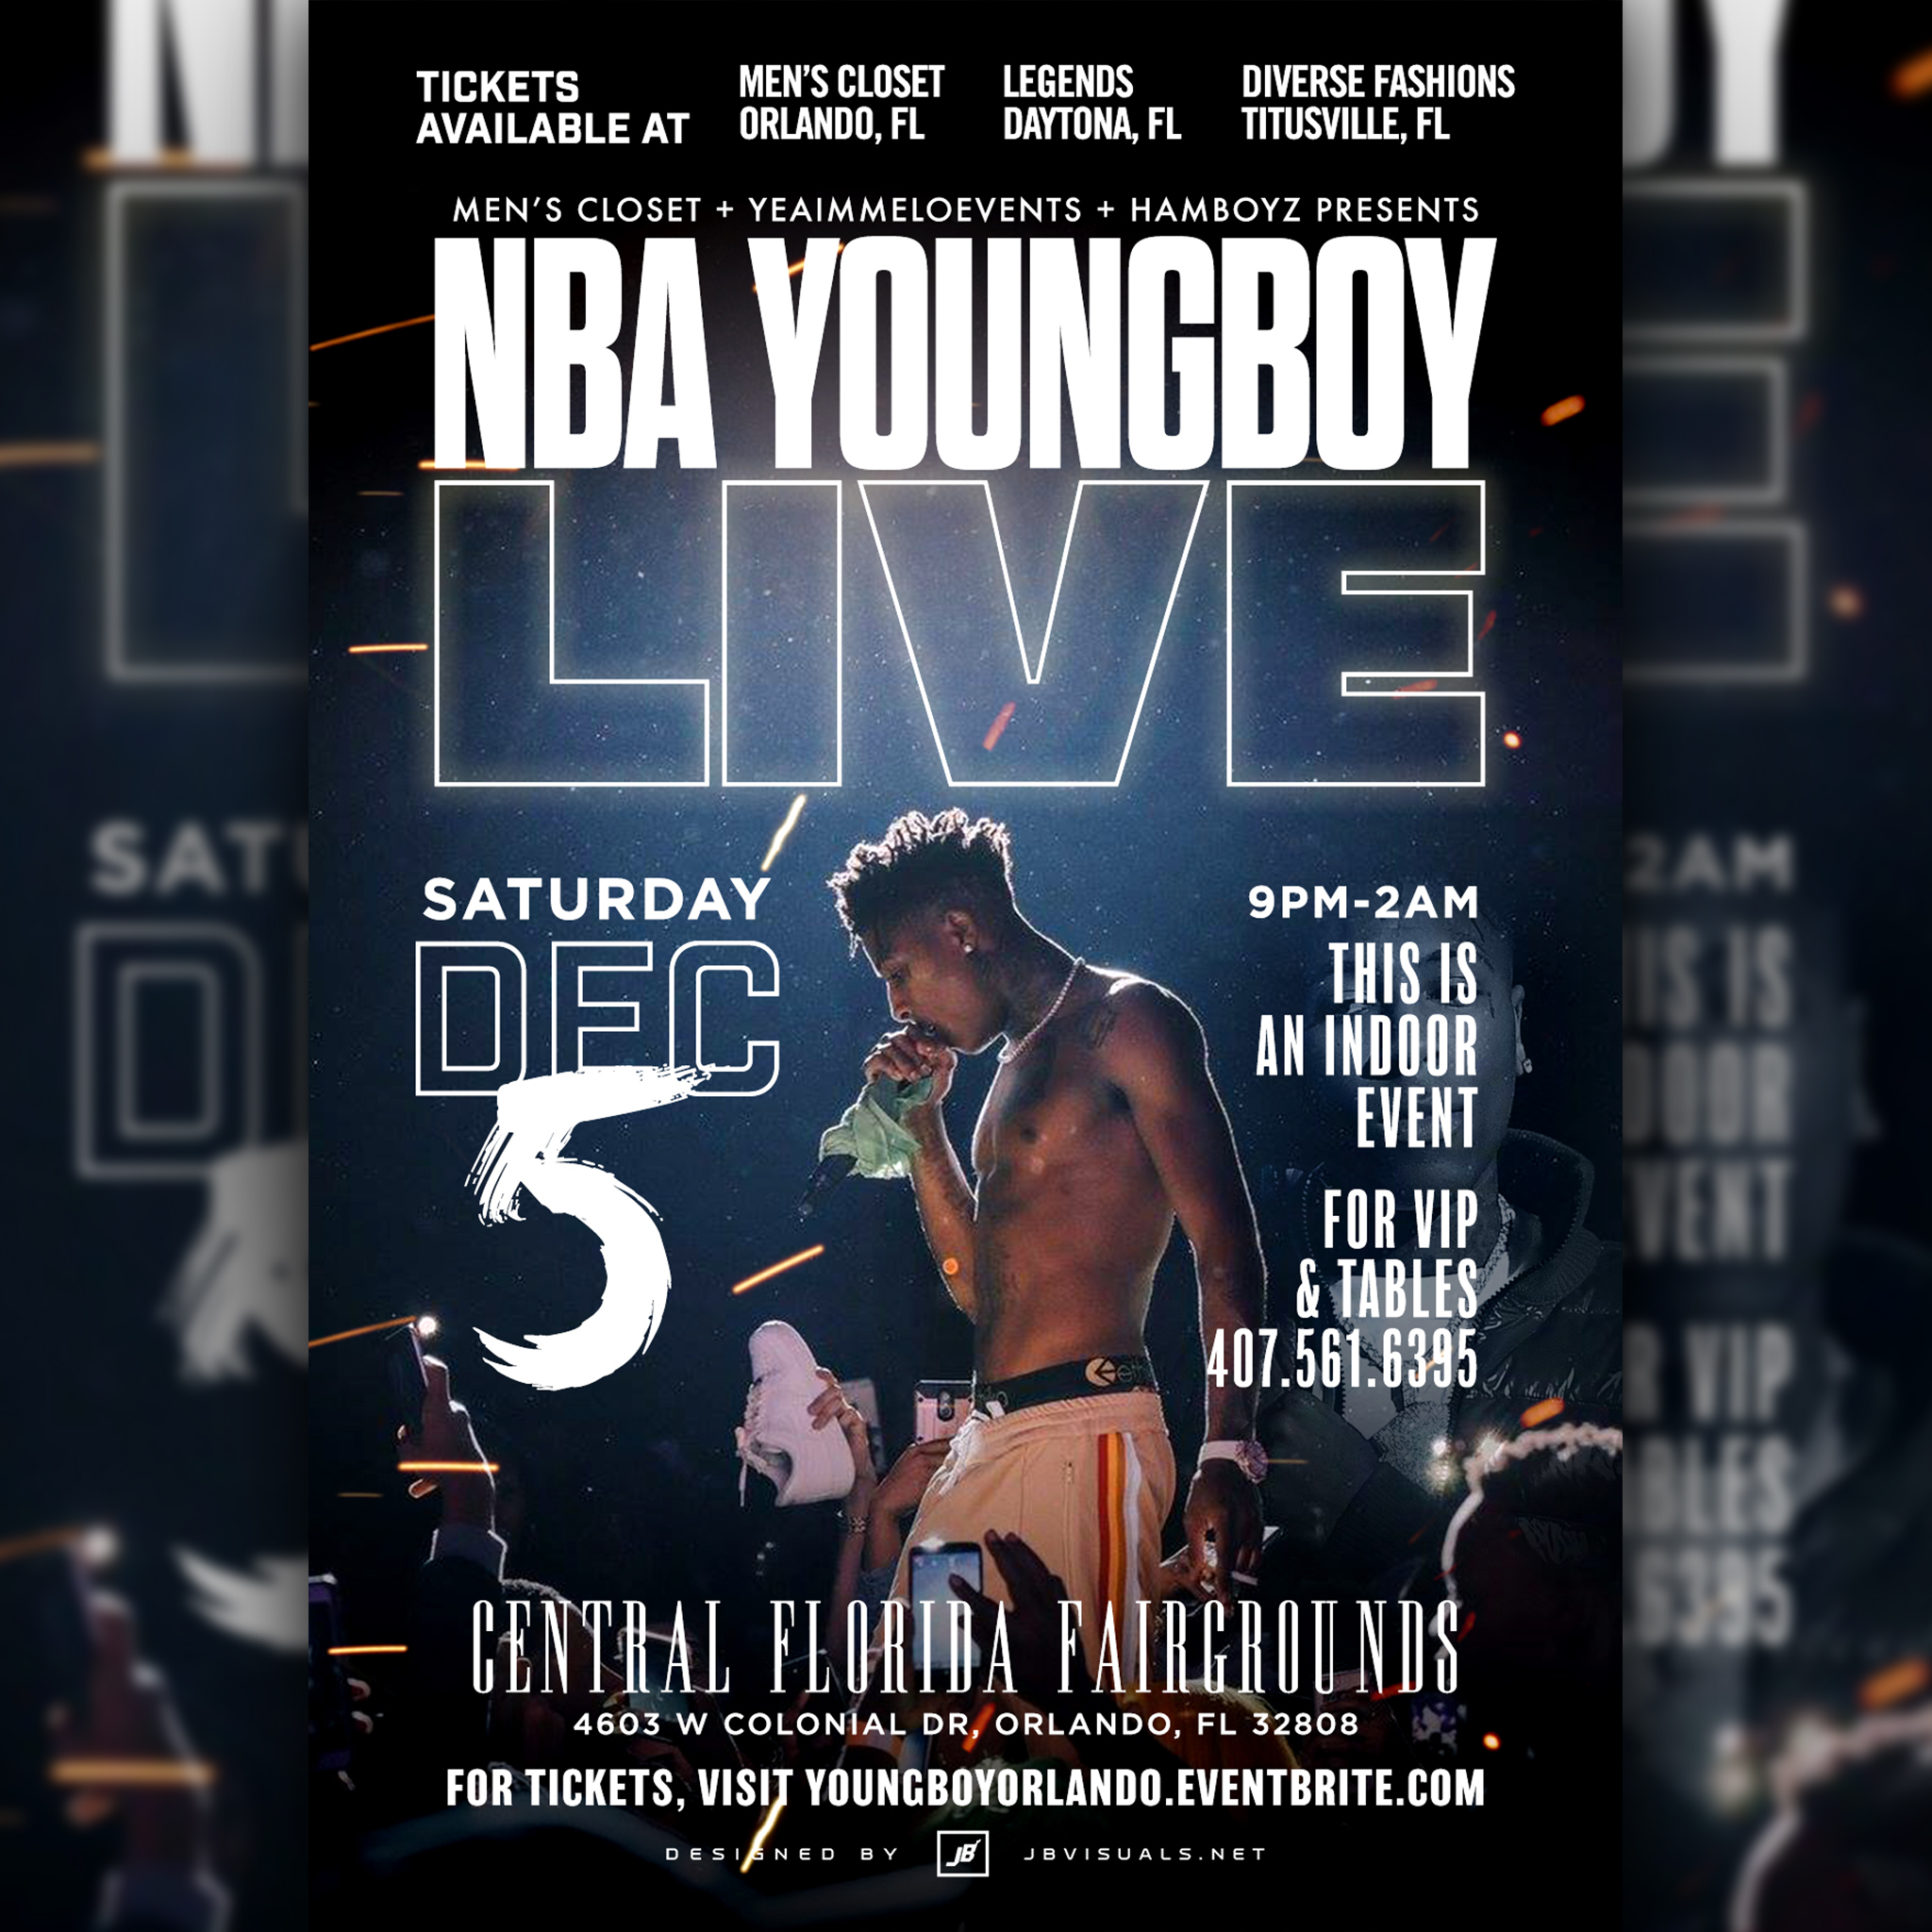 NBA YoungBoy Concert Scheduled for Saturday, December 5, 2020 in